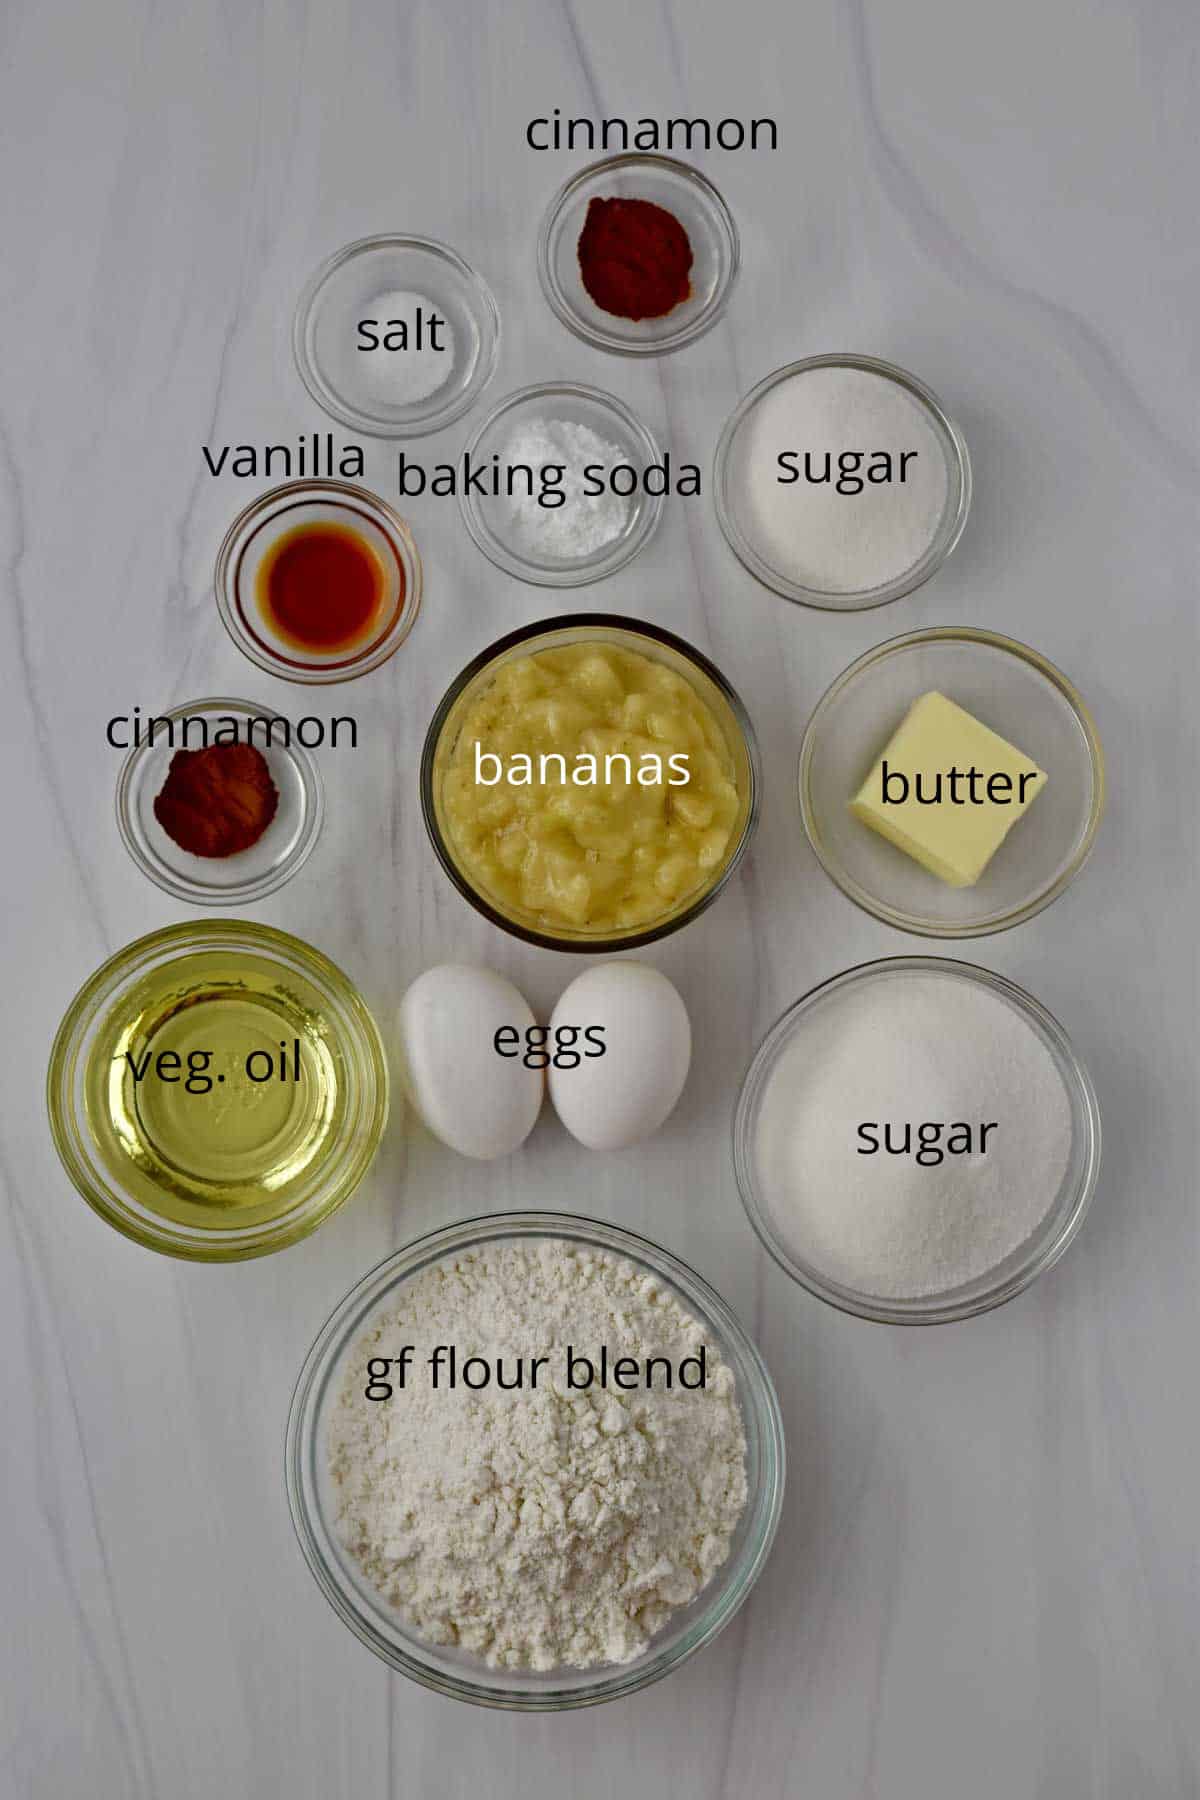 Ingredients, with labels, for gluten free cinnamon banana muffins.